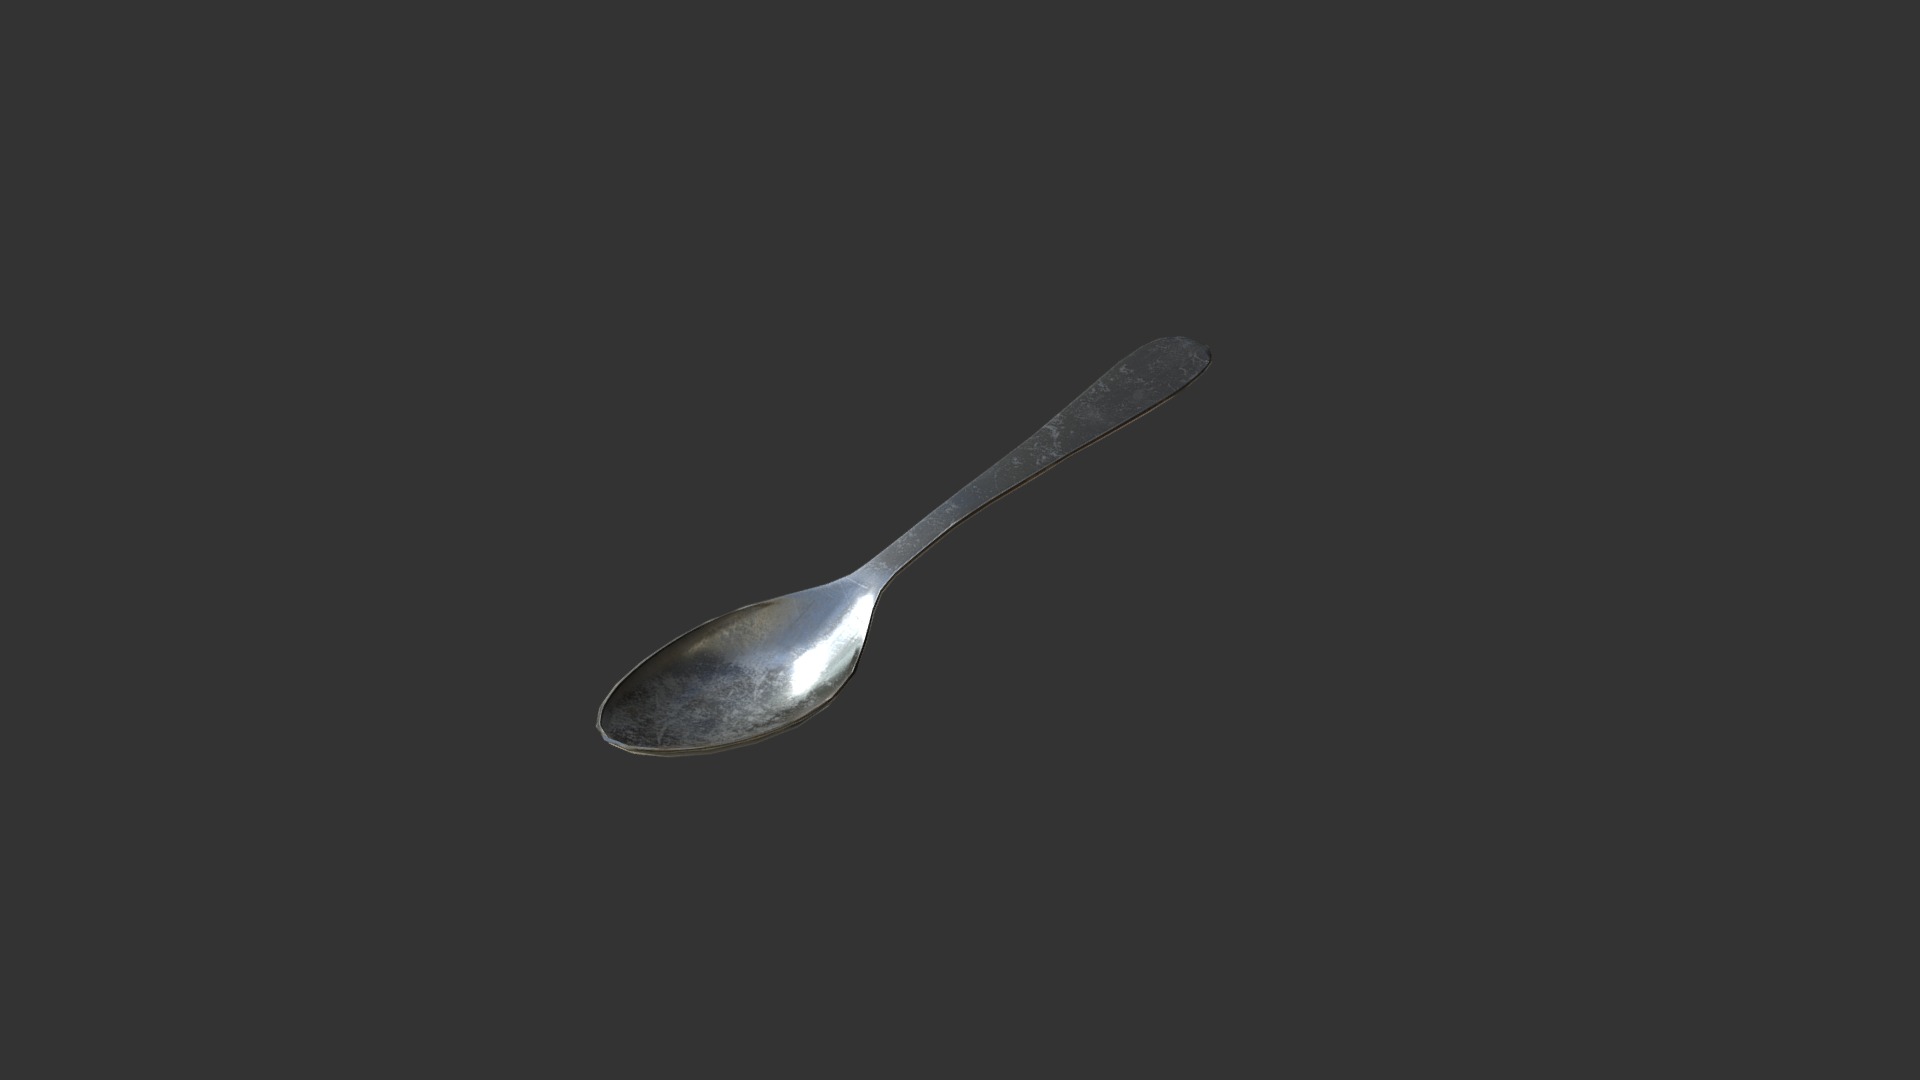 3D model Spoon Low-poly 3D model - This is a 3D model of the Spoon Low-poly 3D model. The 3D model is about a silver spoon with a dark background.